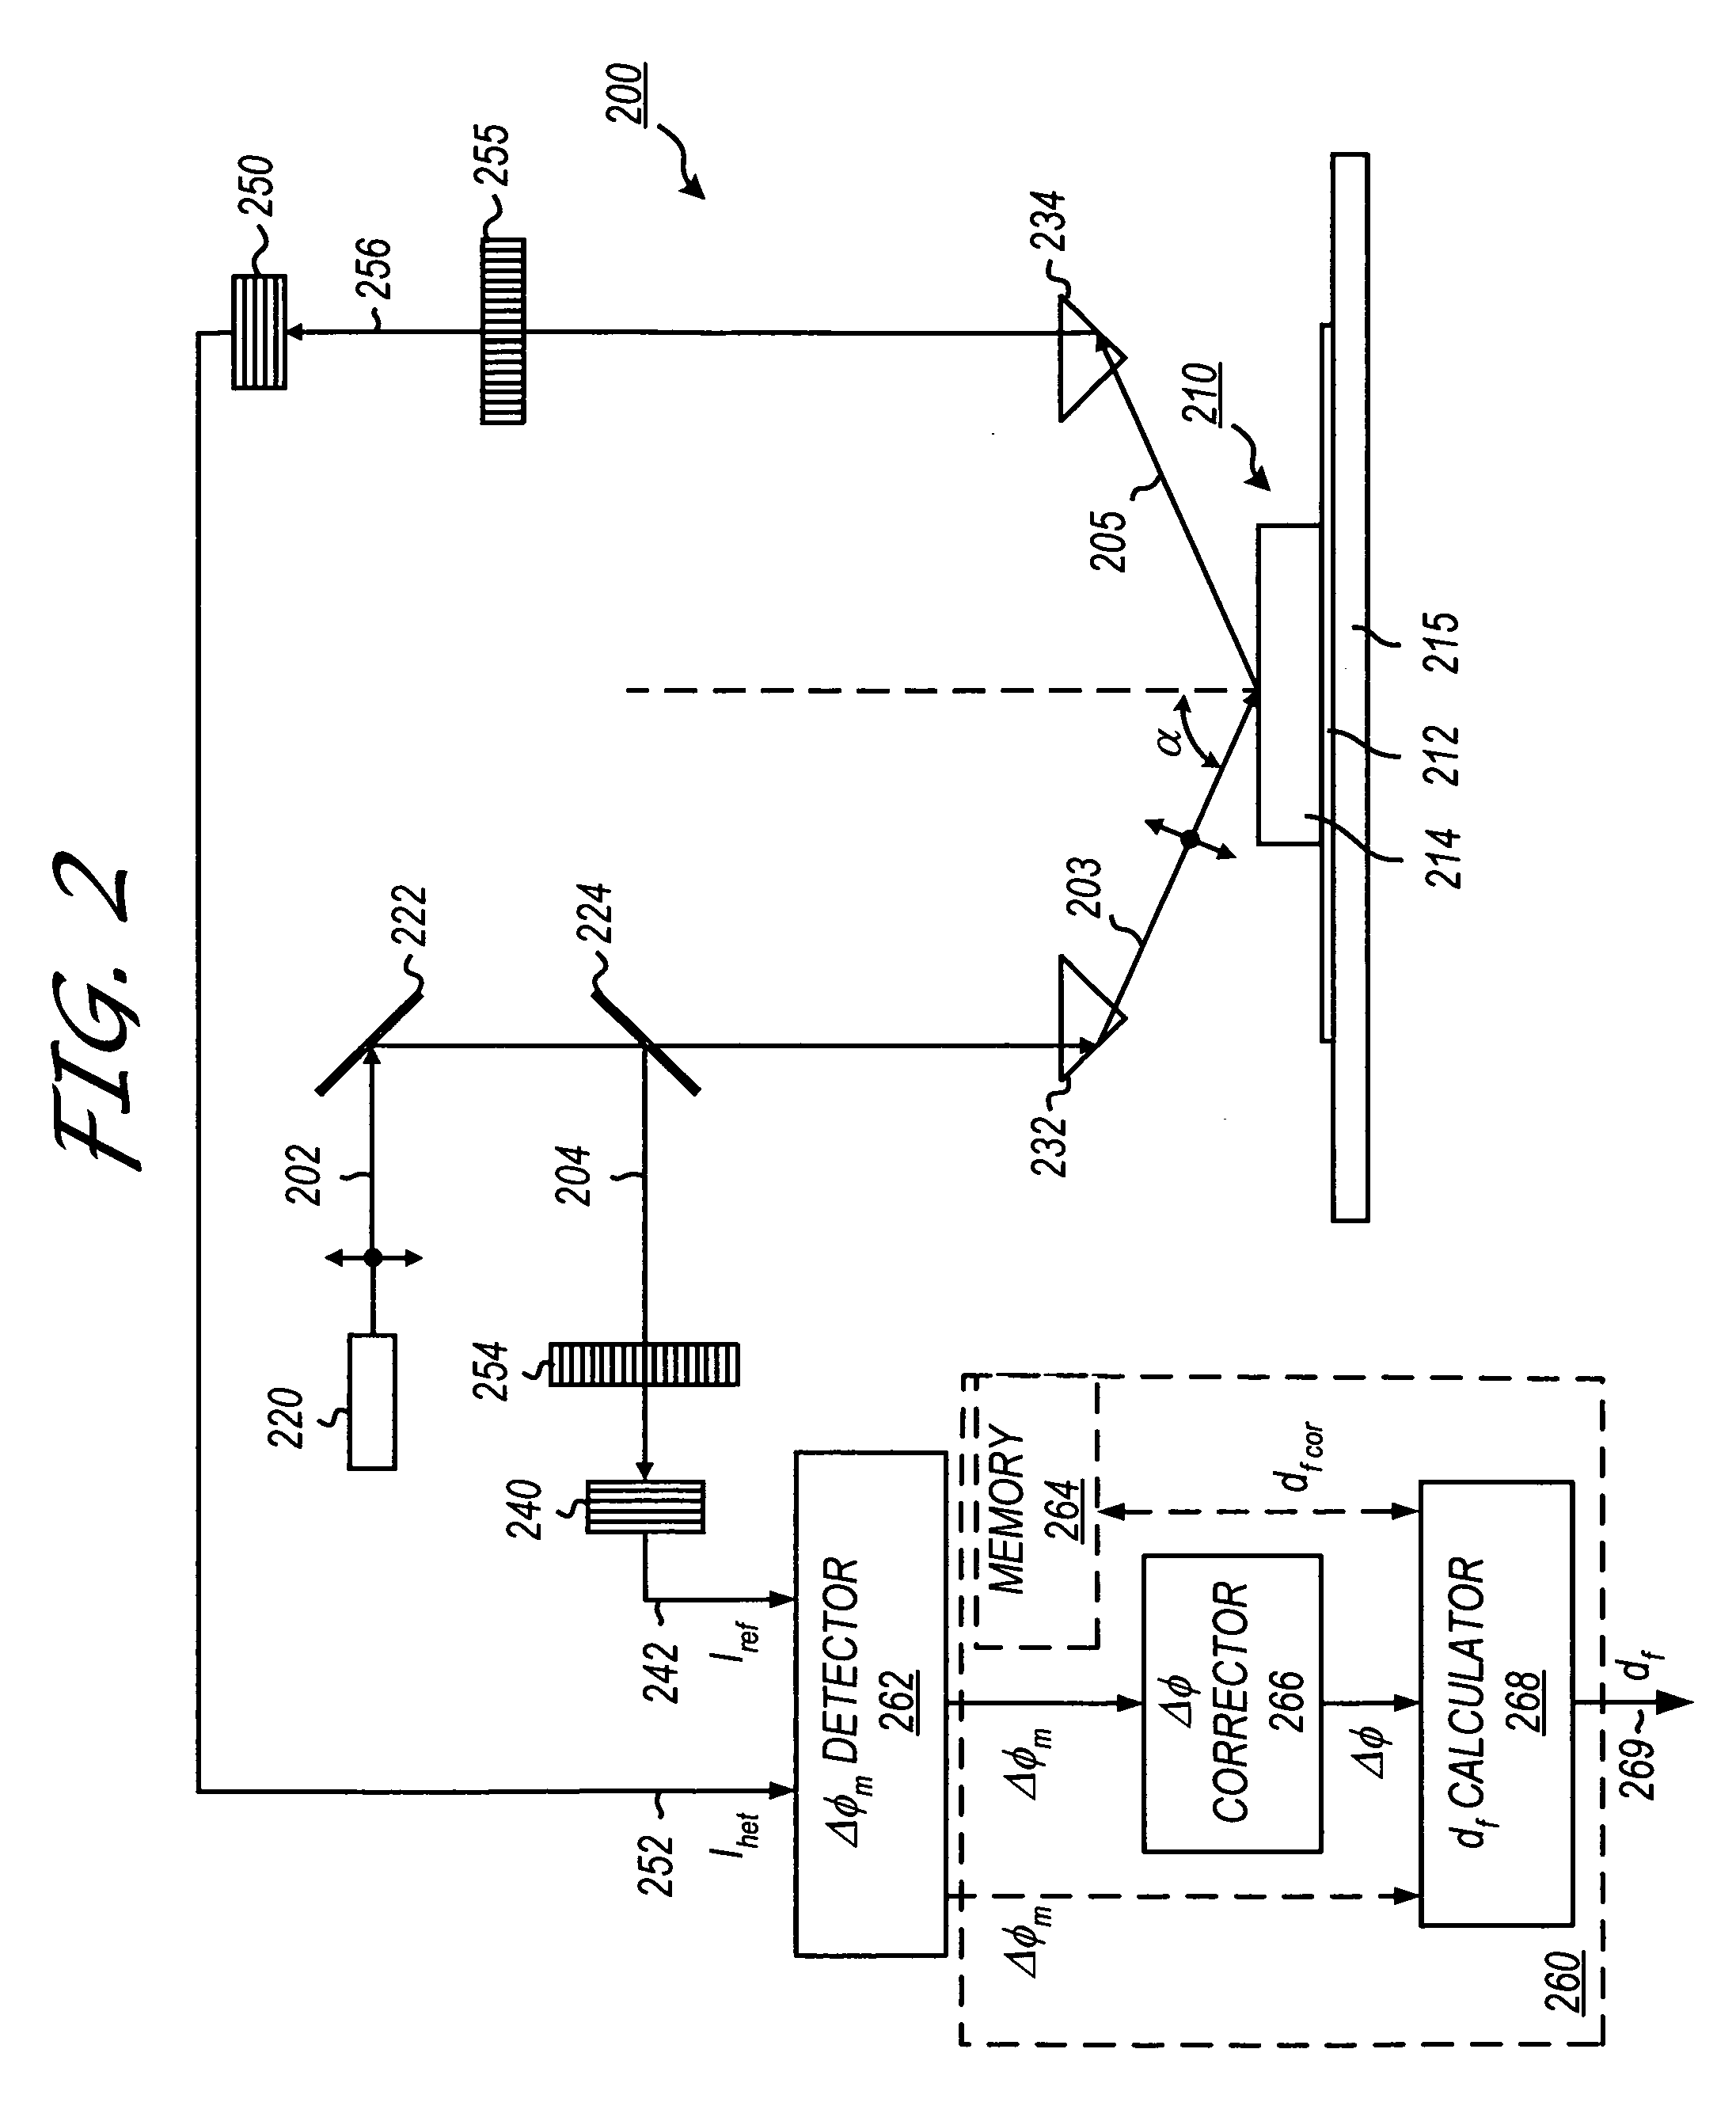 Self referencing heterodyne reflectometer and method for implementing